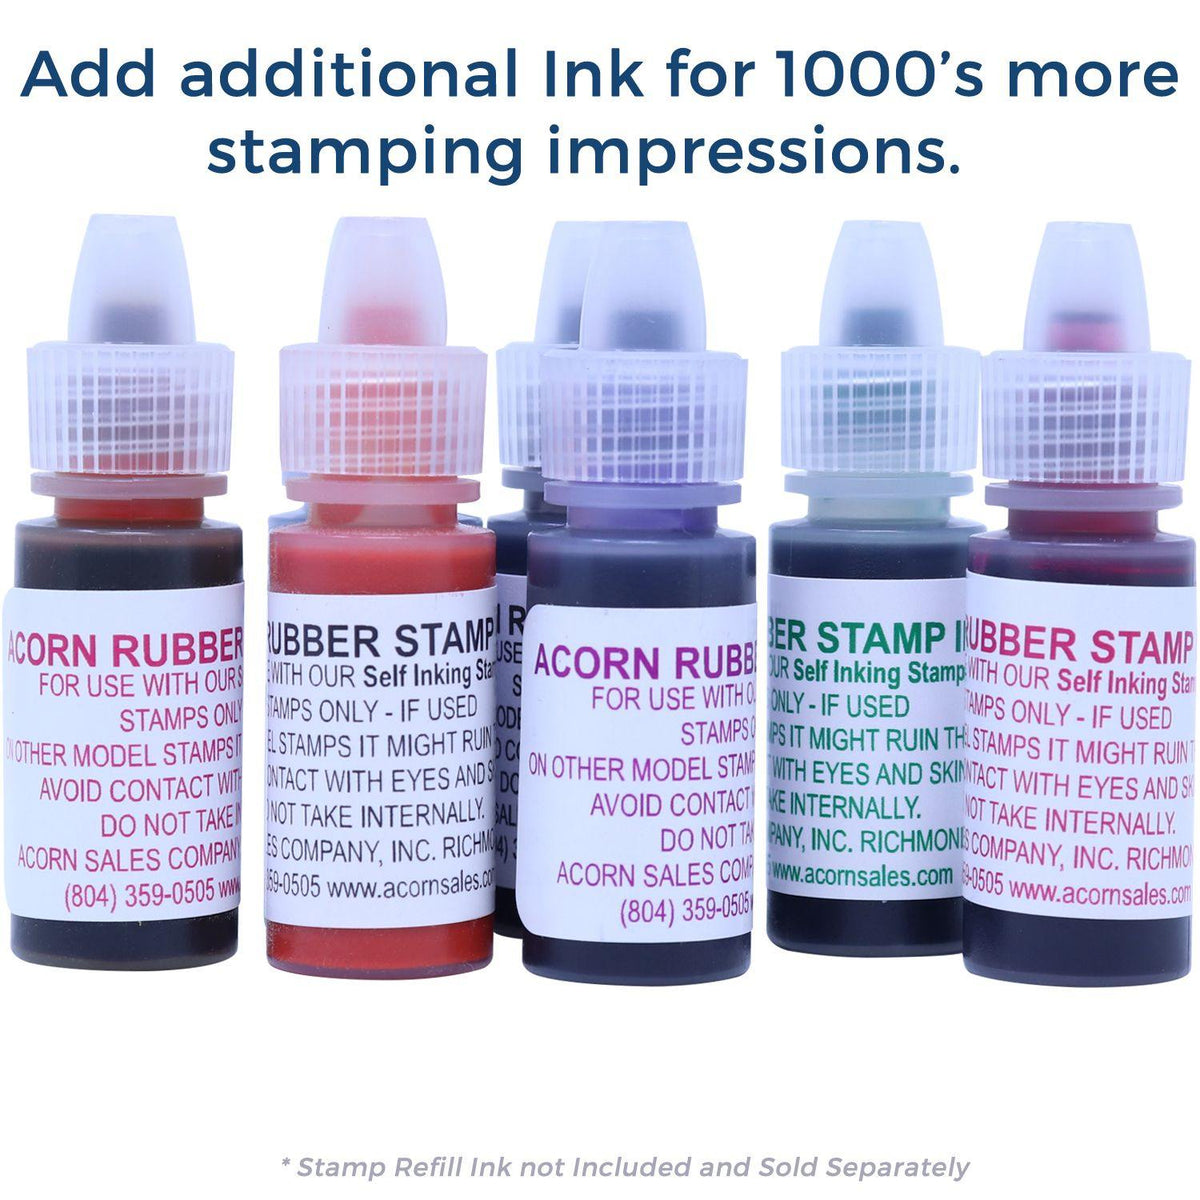 Refill Inks for Large Pre-Inked Stop Covid Patient Stamp Available